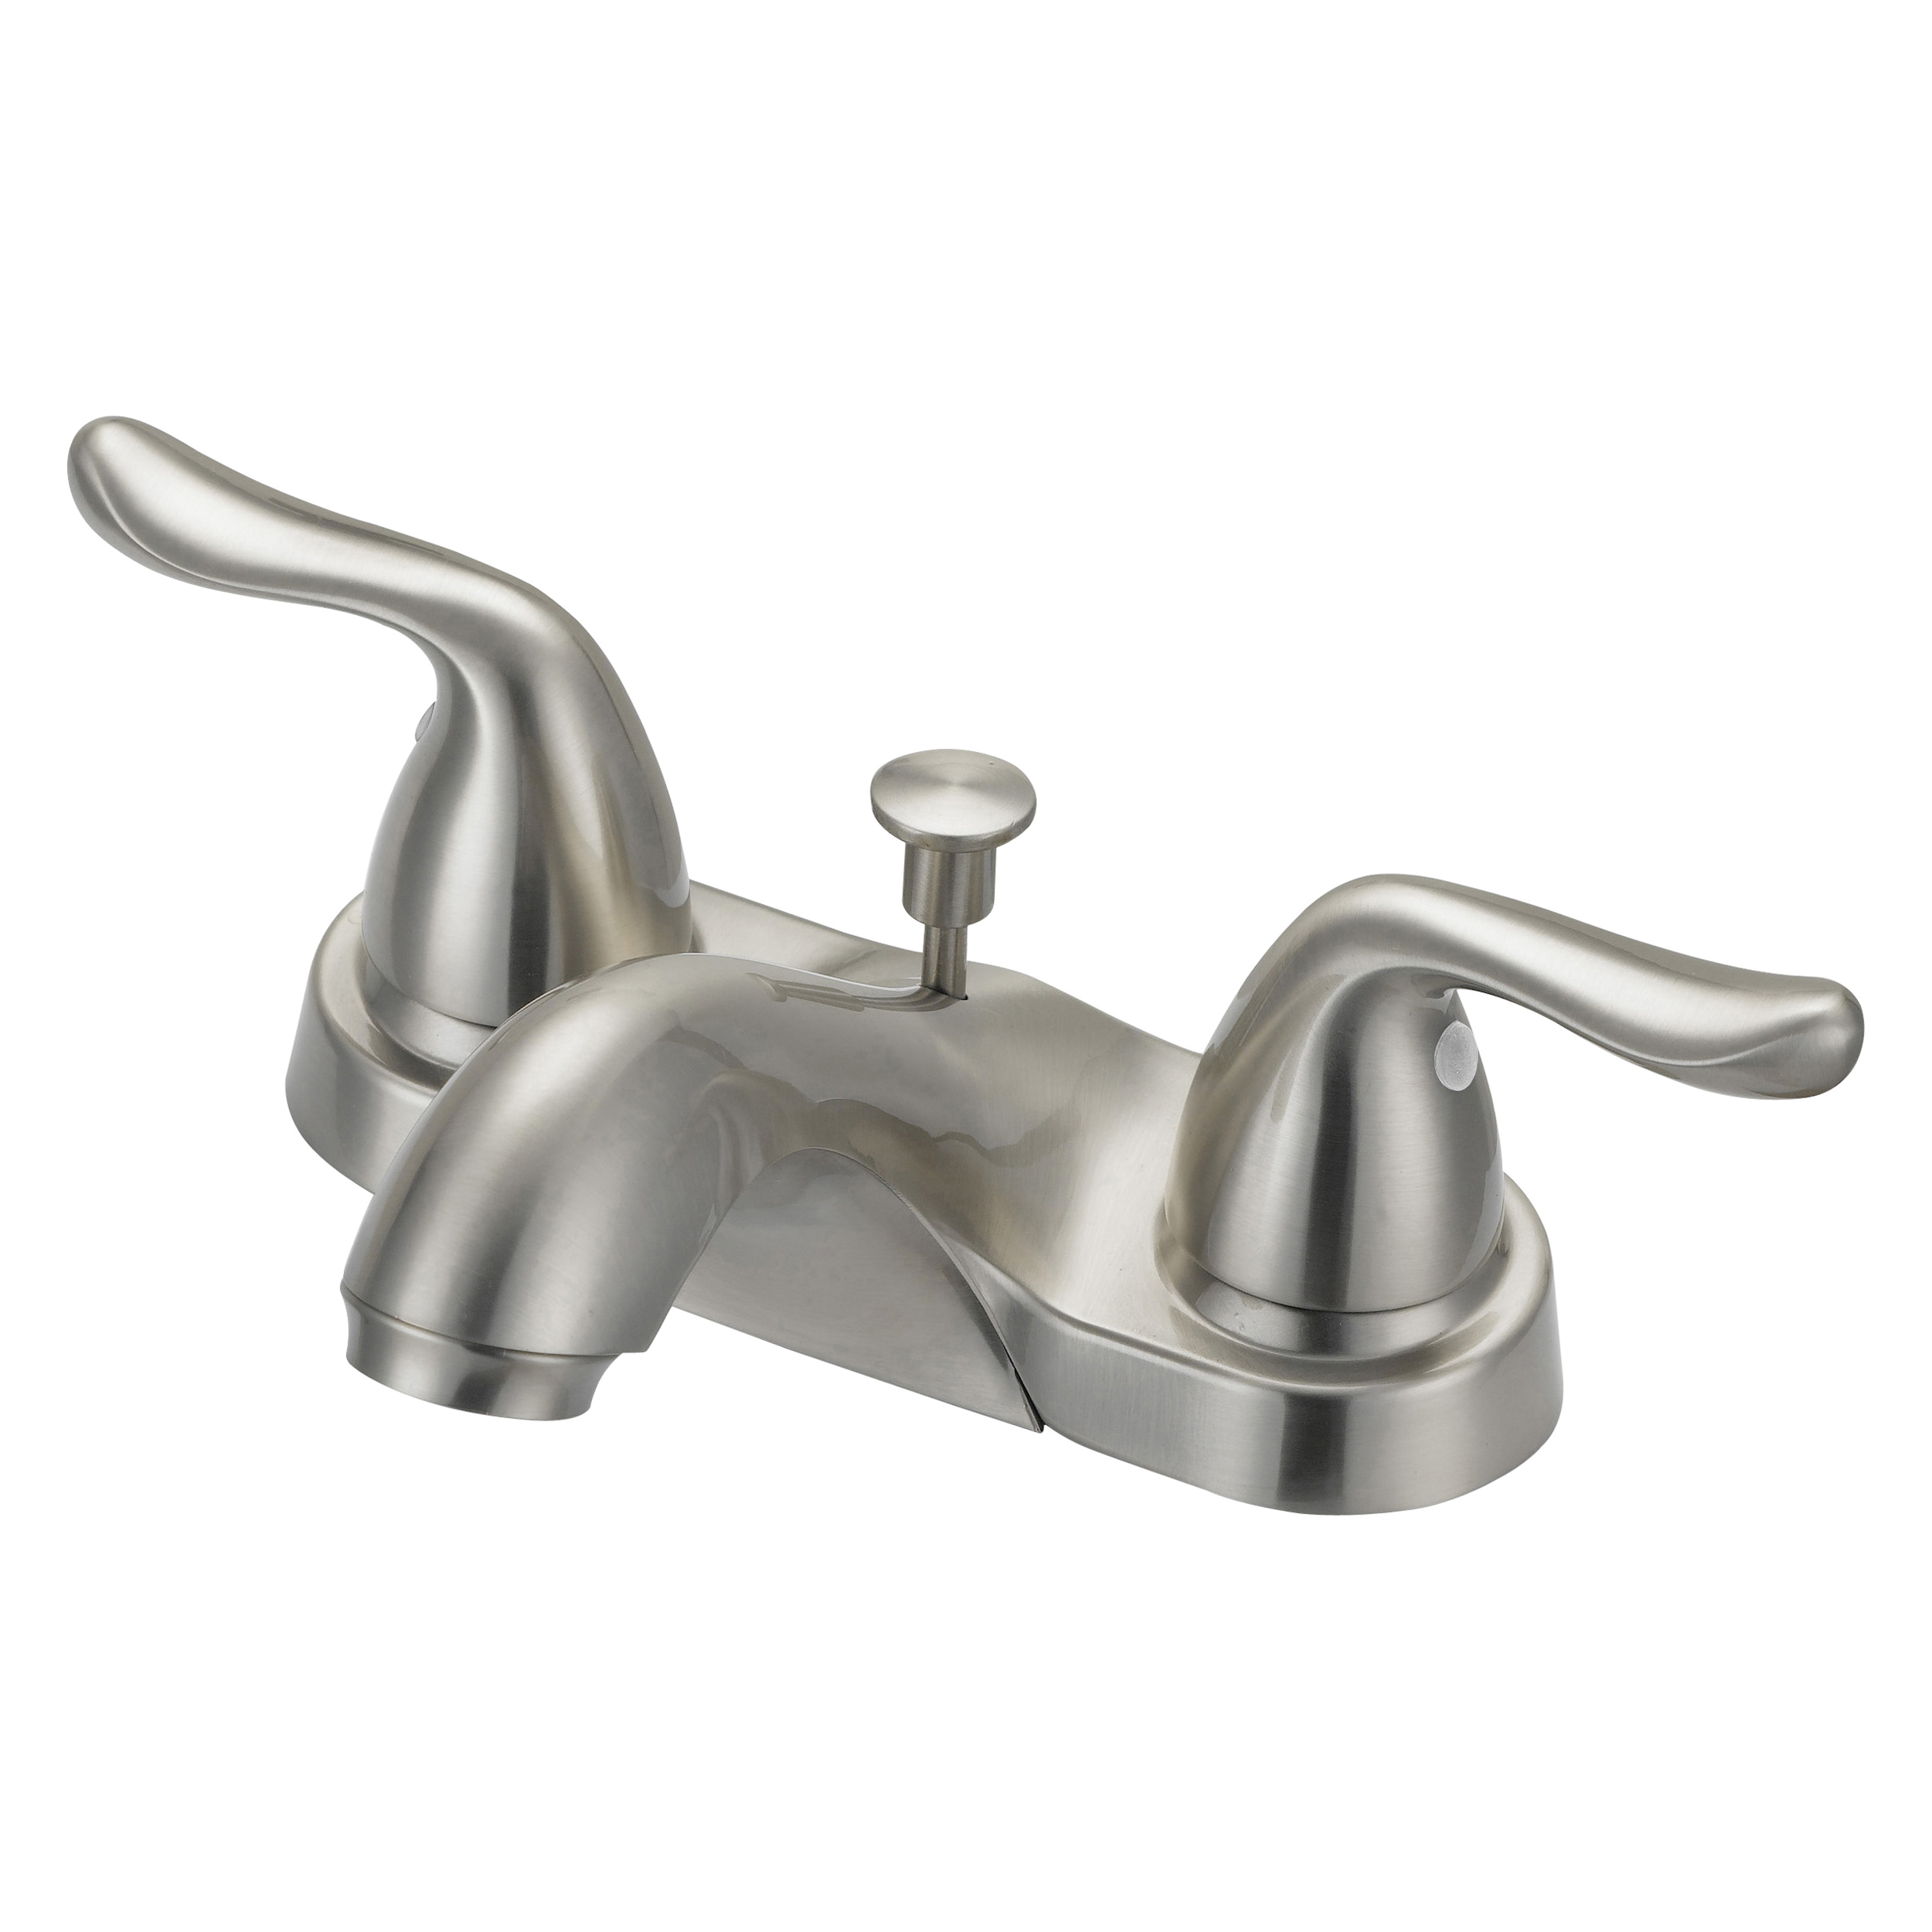 Boston Harbor F5121033NP Lavatory Faucet, 1.2 gpm, 2 -Faucet Handle, 3 -Faucet Hole, Metal, Brushed Nickel